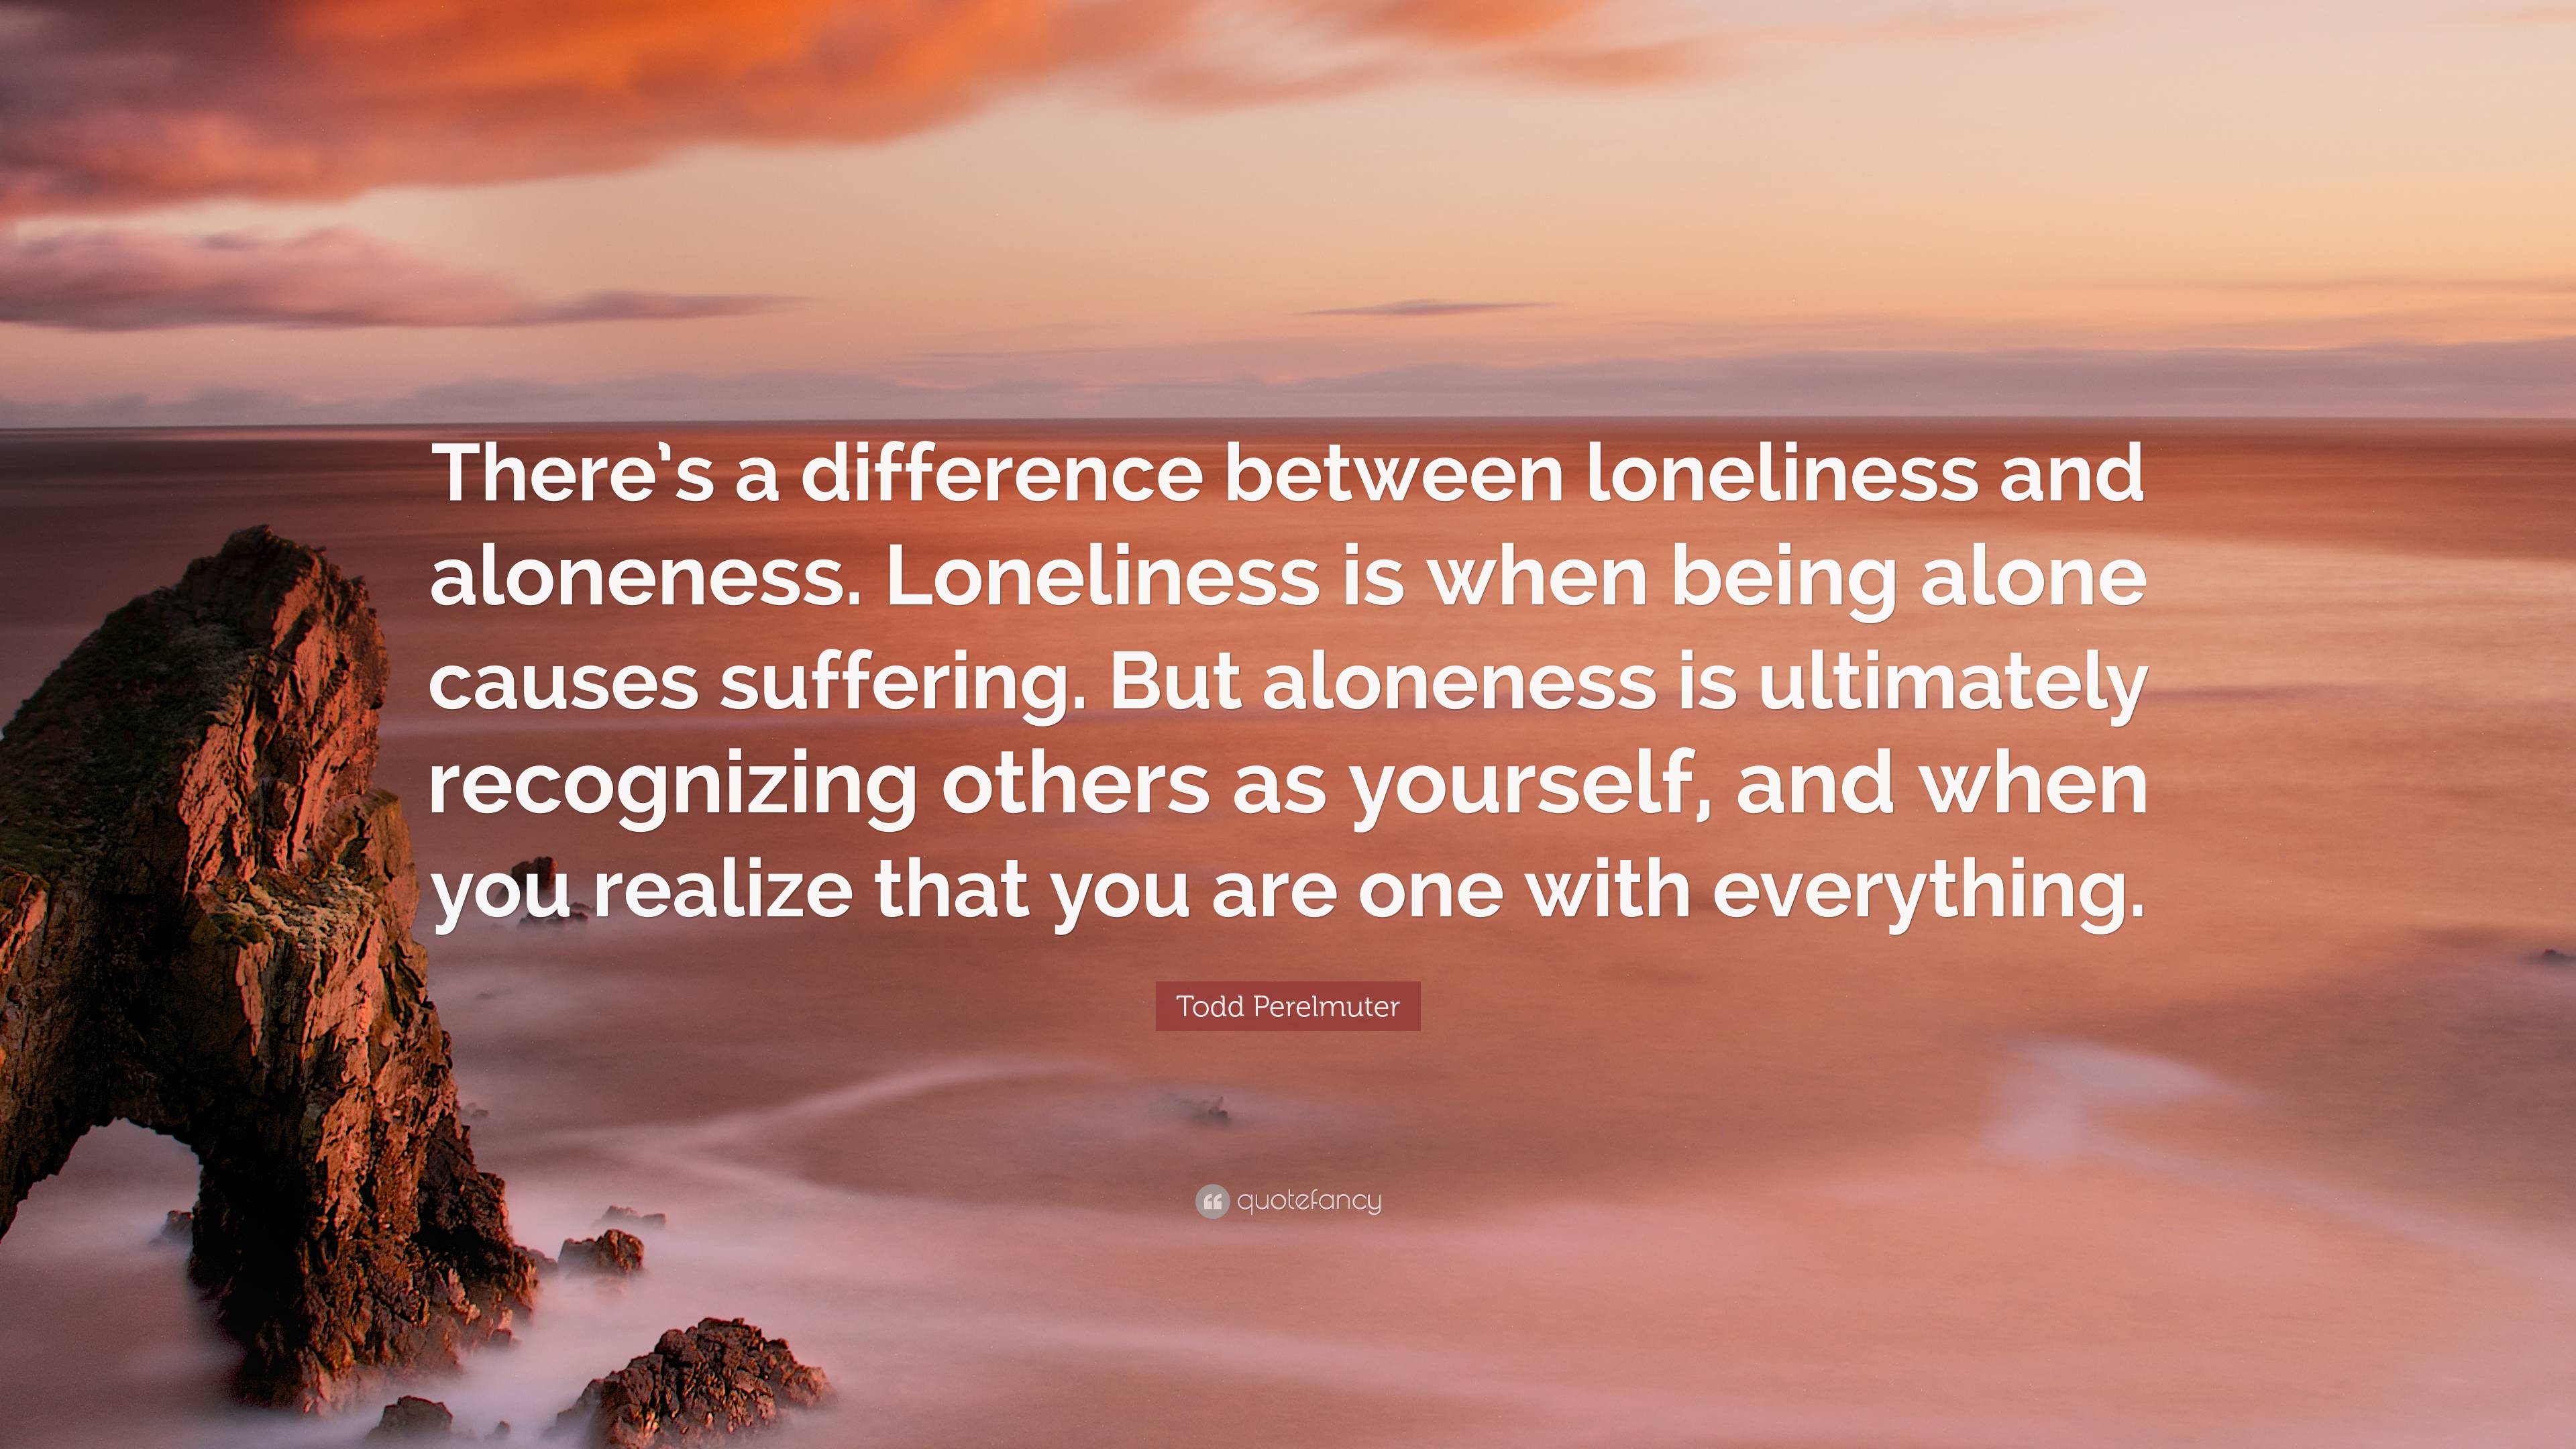 Being Lonely and Being Alone: What's the Difference? - Nystrom & Associates